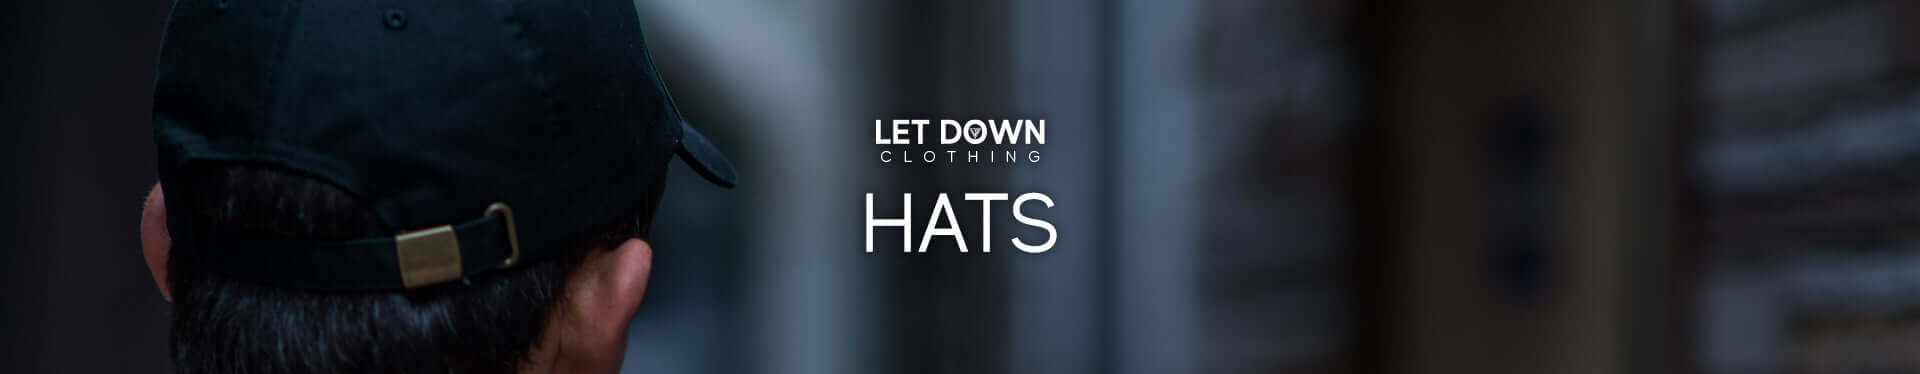 Let Down Clothing Hats